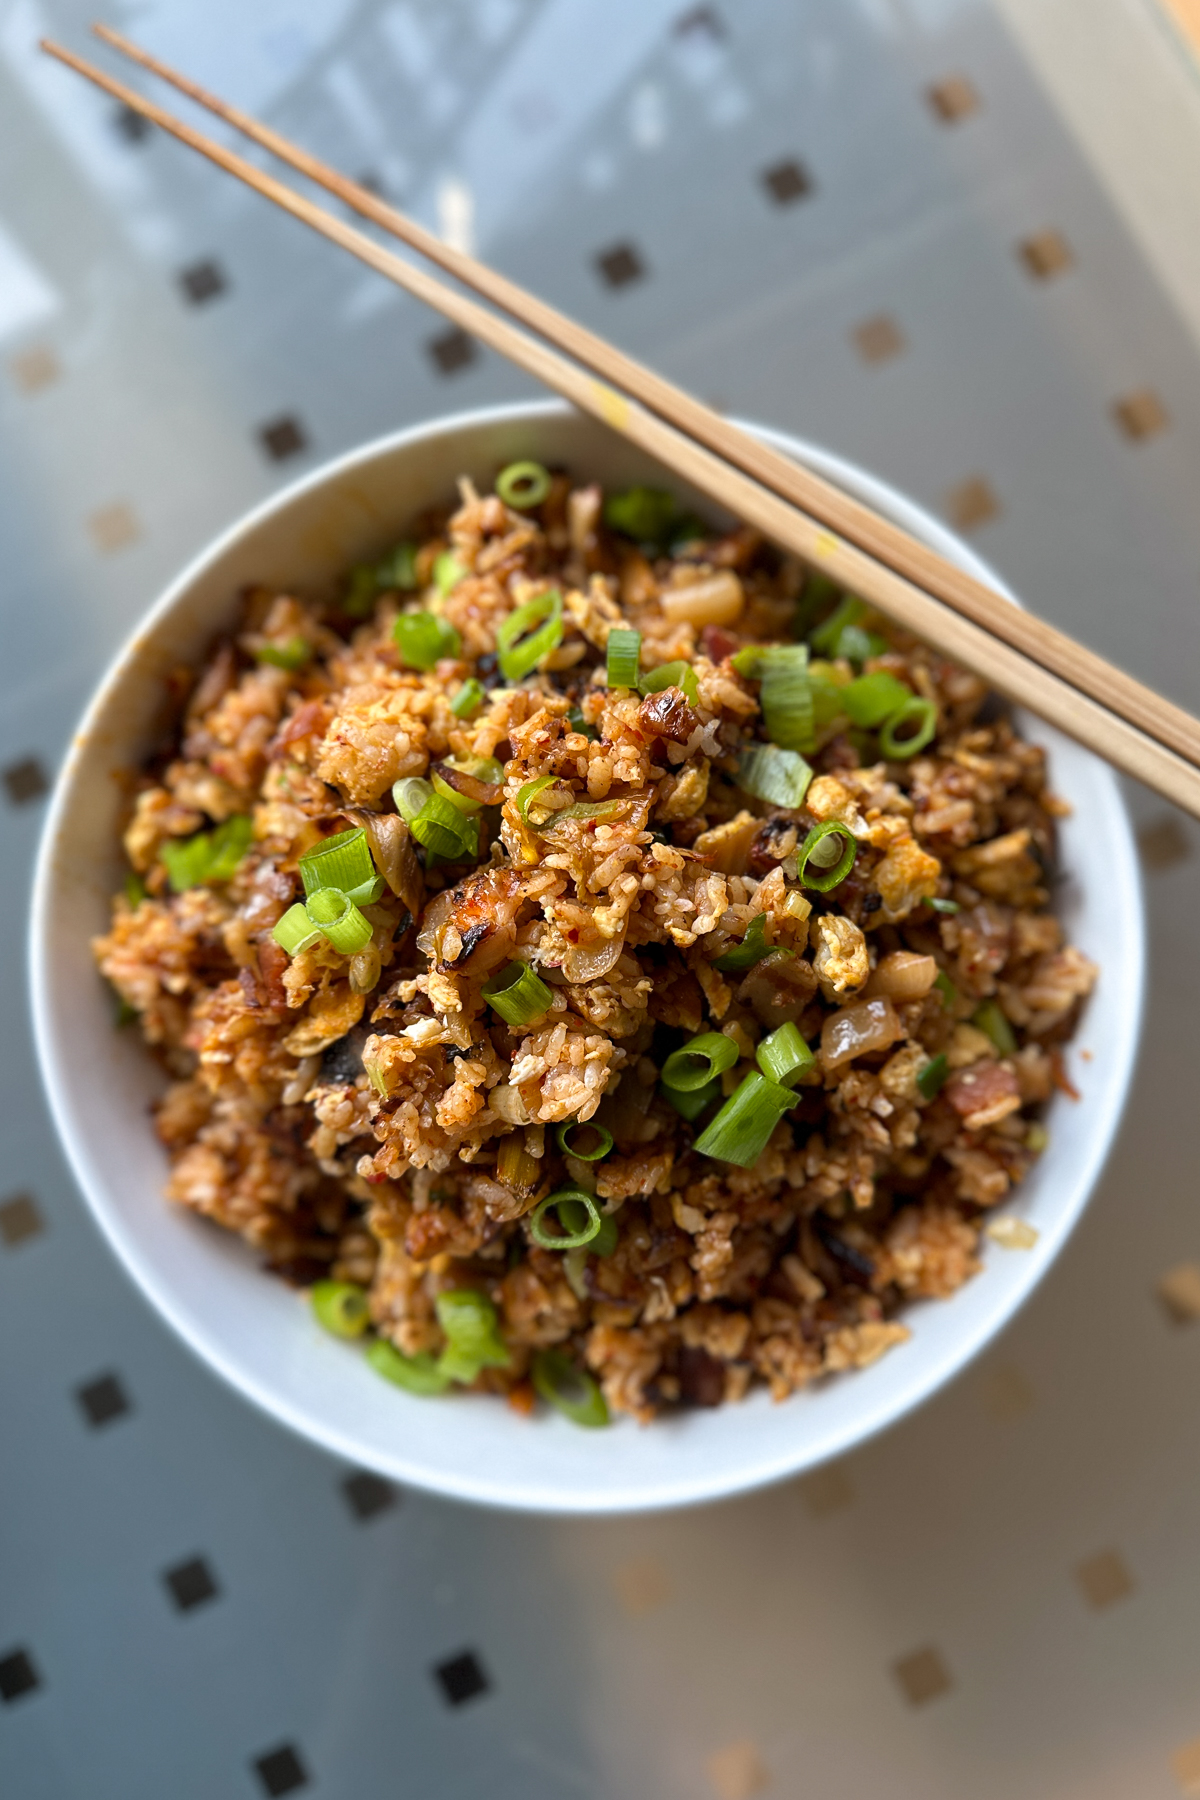 Kimchi fried rice in a bowl, ready to eat and enjoy.